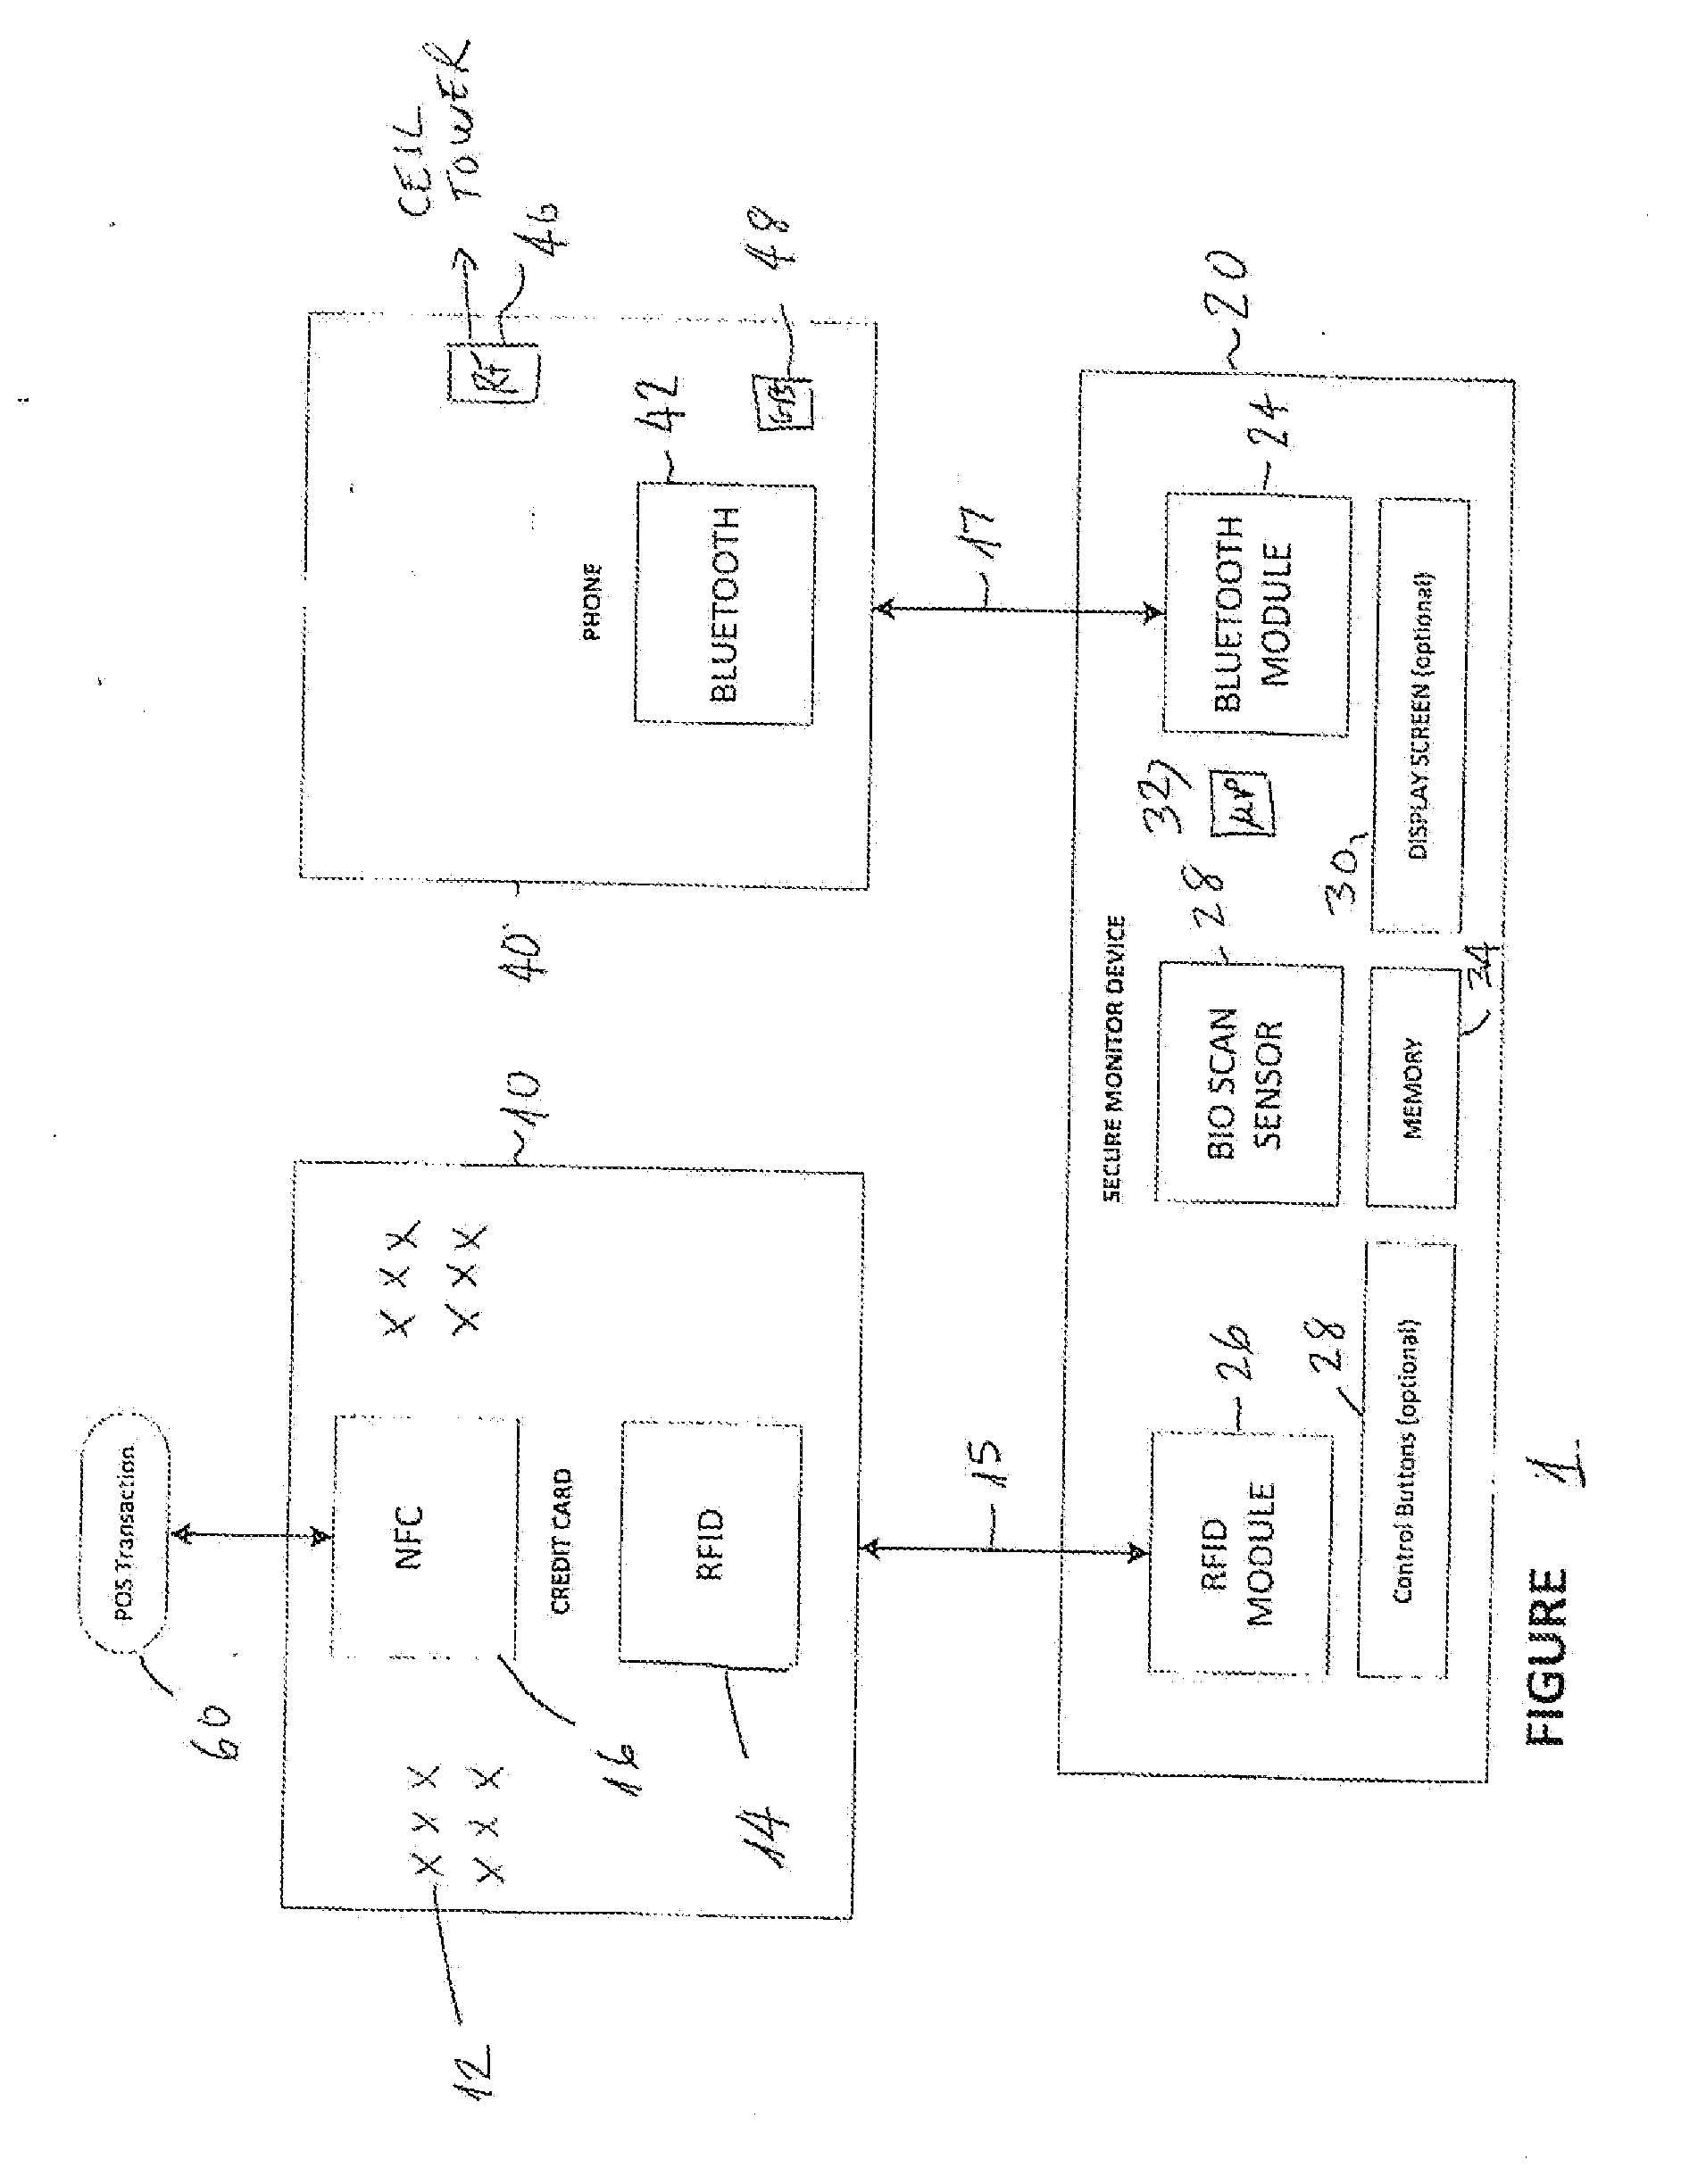 Method and system for conducting secure transactions with credit cards using a monitoring device